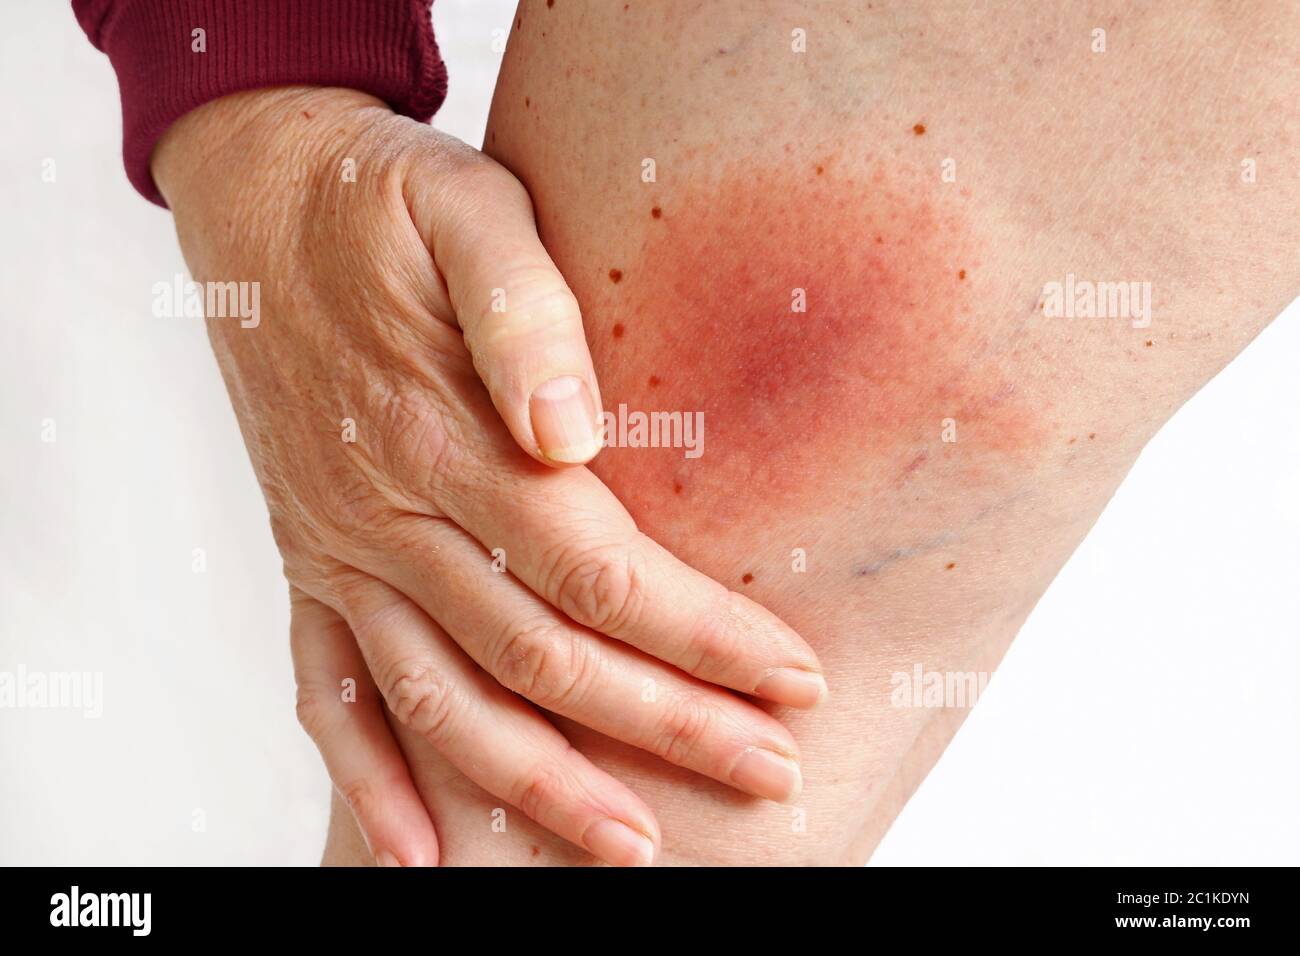 Wandering flush Lyme borreliosis of the leg of a woman transmitted by a tick. Lyme disease caused by a tick bite on the thigh. Stock Photo